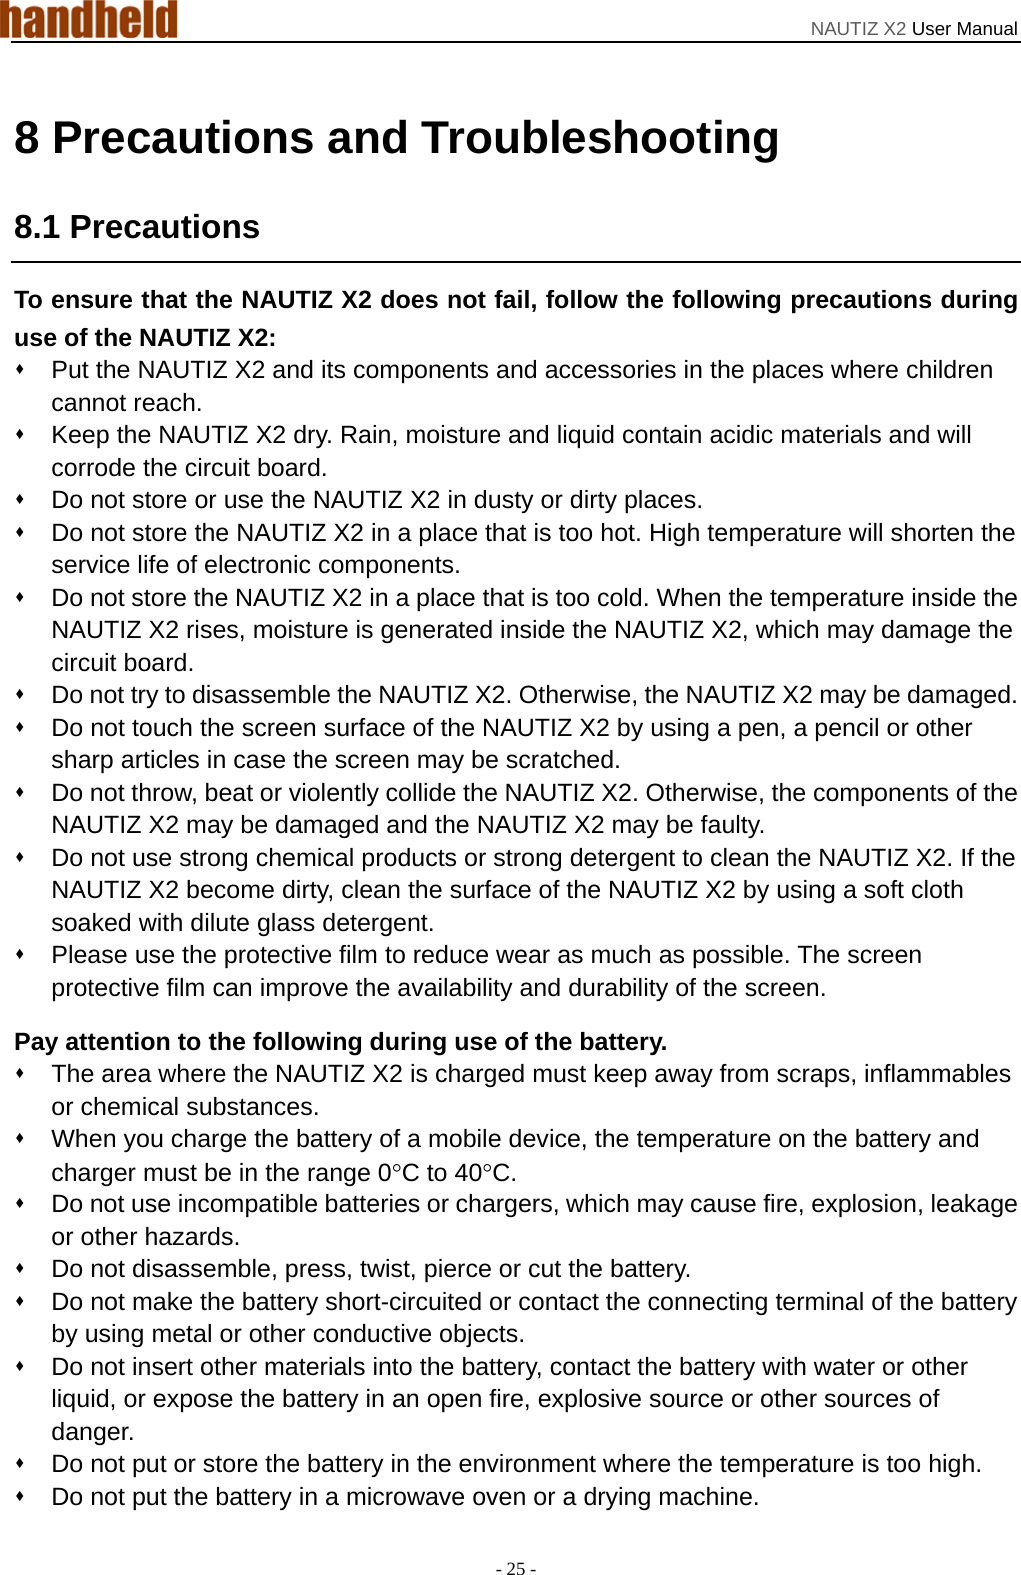 NAUTIZ X2 User Manual - 25 - 8 Precautions and Troubleshooting 8.1 Precautions To ensure that the NAUTIZ X2 does not fail, follow the following precautions during use of the NAUTIZ X2:   Put the NAUTIZ X2 and its components and accessories in the places where children cannot reach.   Keep the NAUTIZ X2 dry. Rain, moisture and liquid contain acidic materials and will corrode the circuit board.   Do not store or use the NAUTIZ X2 in dusty or dirty places.   Do not store the NAUTIZ X2 in a place that is too hot. High temperature will shorten the service life of electronic components.   Do not store the NAUTIZ X2 in a place that is too cold. When the temperature inside the NAUTIZ X2 rises, moisture is generated inside the NAUTIZ X2, which may damage the circuit board.   Do not try to disassemble the NAUTIZ X2. Otherwise, the NAUTIZ X2 may be damaged.     Do not touch the screen surface of the NAUTIZ X2 by using a pen, a pencil or other sharp articles in case the screen may be scratched.   Do not throw, beat or violently collide the NAUTIZ X2. Otherwise, the components of the NAUTIZ X2 may be damaged and the NAUTIZ X2 may be faulty.   Do not use strong chemical products or strong detergent to clean the NAUTIZ X2. If the NAUTIZ X2 become dirty, clean the surface of the NAUTIZ X2 by using a soft cloth soaked with dilute glass detergent.   Please use the protective film to reduce wear as much as possible. The screen protective film can improve the availability and durability of the screen. Pay attention to the following during use of the battery.   The area where the NAUTIZ X2 is charged must keep away from scraps, inflammables or chemical substances.   When you charge the battery of a mobile device, the temperature on the battery and charger must be in the range 0°C to 40°C.   Do not use incompatible batteries or chargers, which may cause fire, explosion, leakage or other hazards.   Do not disassemble, press, twist, pierce or cut the battery.   Do not make the battery short-circuited or contact the connecting terminal of the battery by using metal or other conductive objects.   Do not insert other materials into the battery, contact the battery with water or other liquid, or expose the battery in an open fire, explosive source or other sources of danger.   Do not put or store the battery in the environment where the temperature is too high.     Do not put the battery in a microwave oven or a drying machine. 